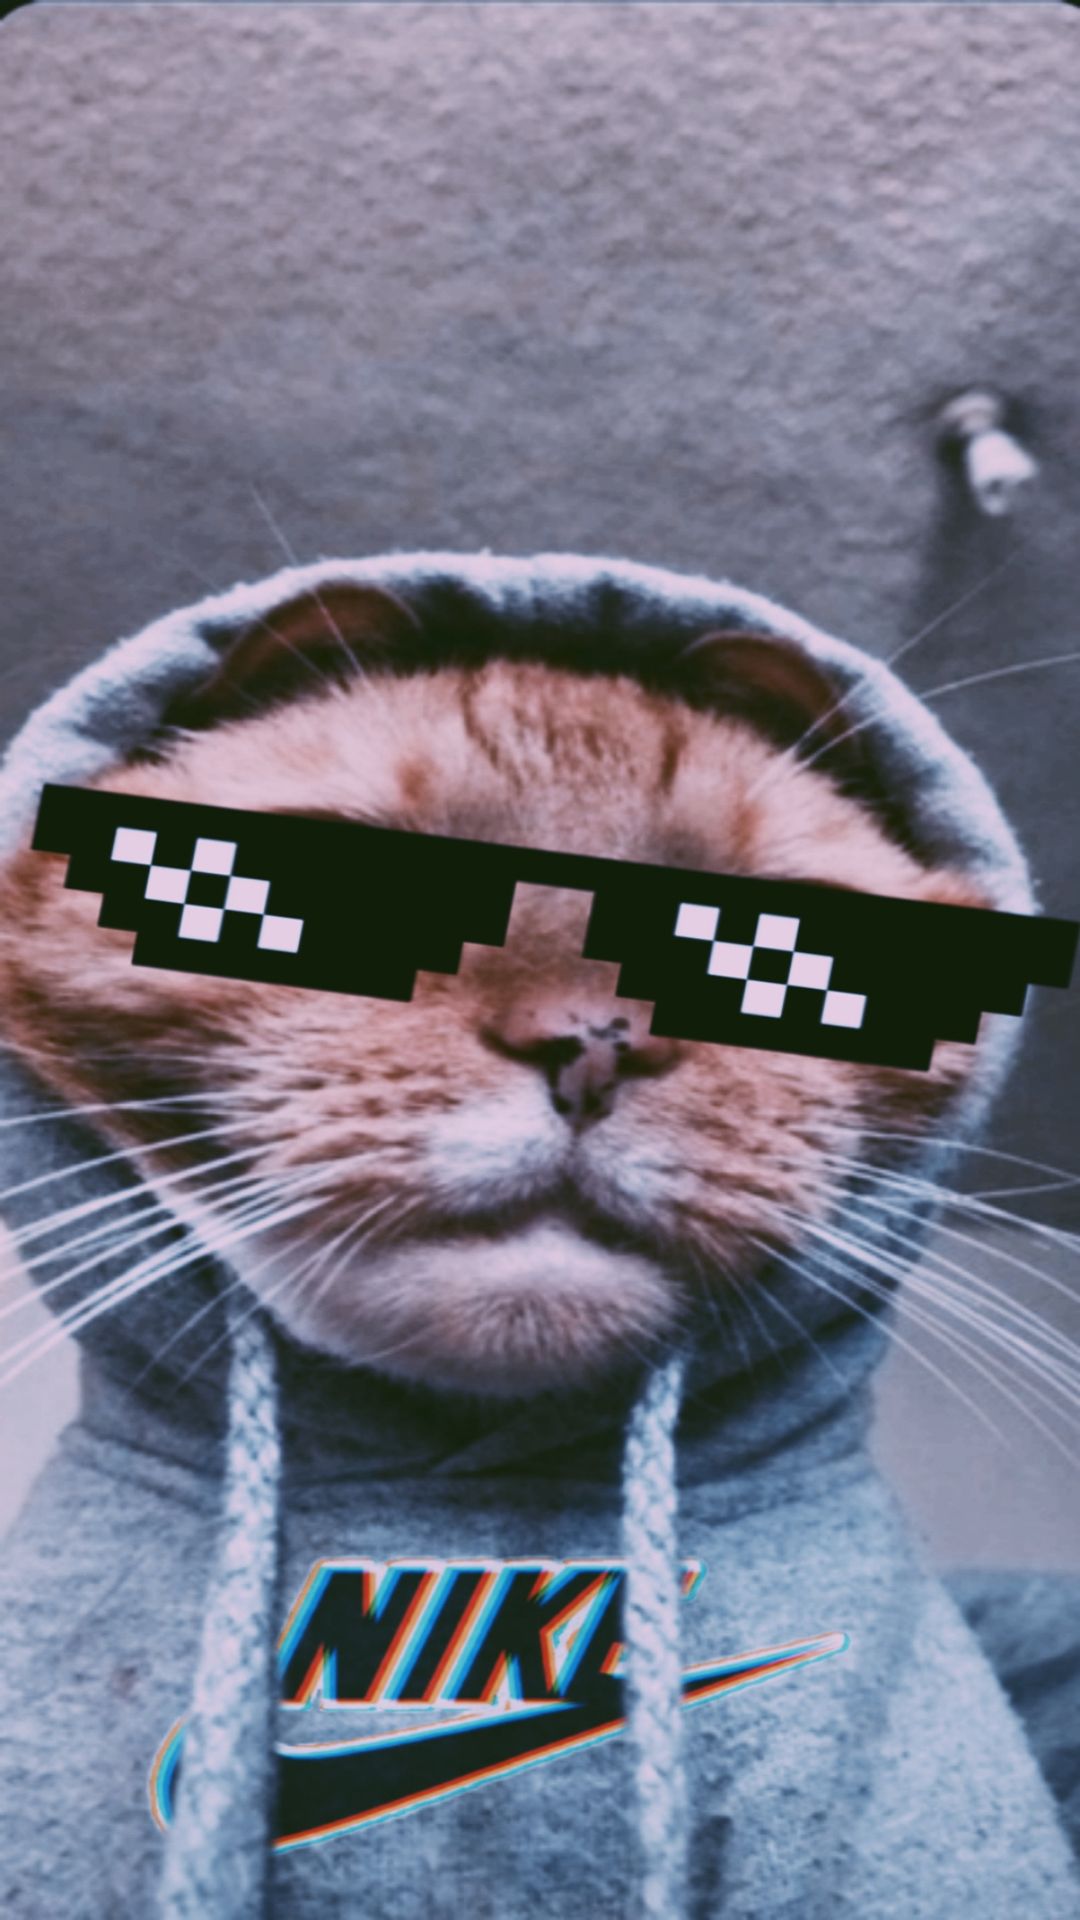 A cat wearing sunglasses and sitting in front of the camera - Cat, funny